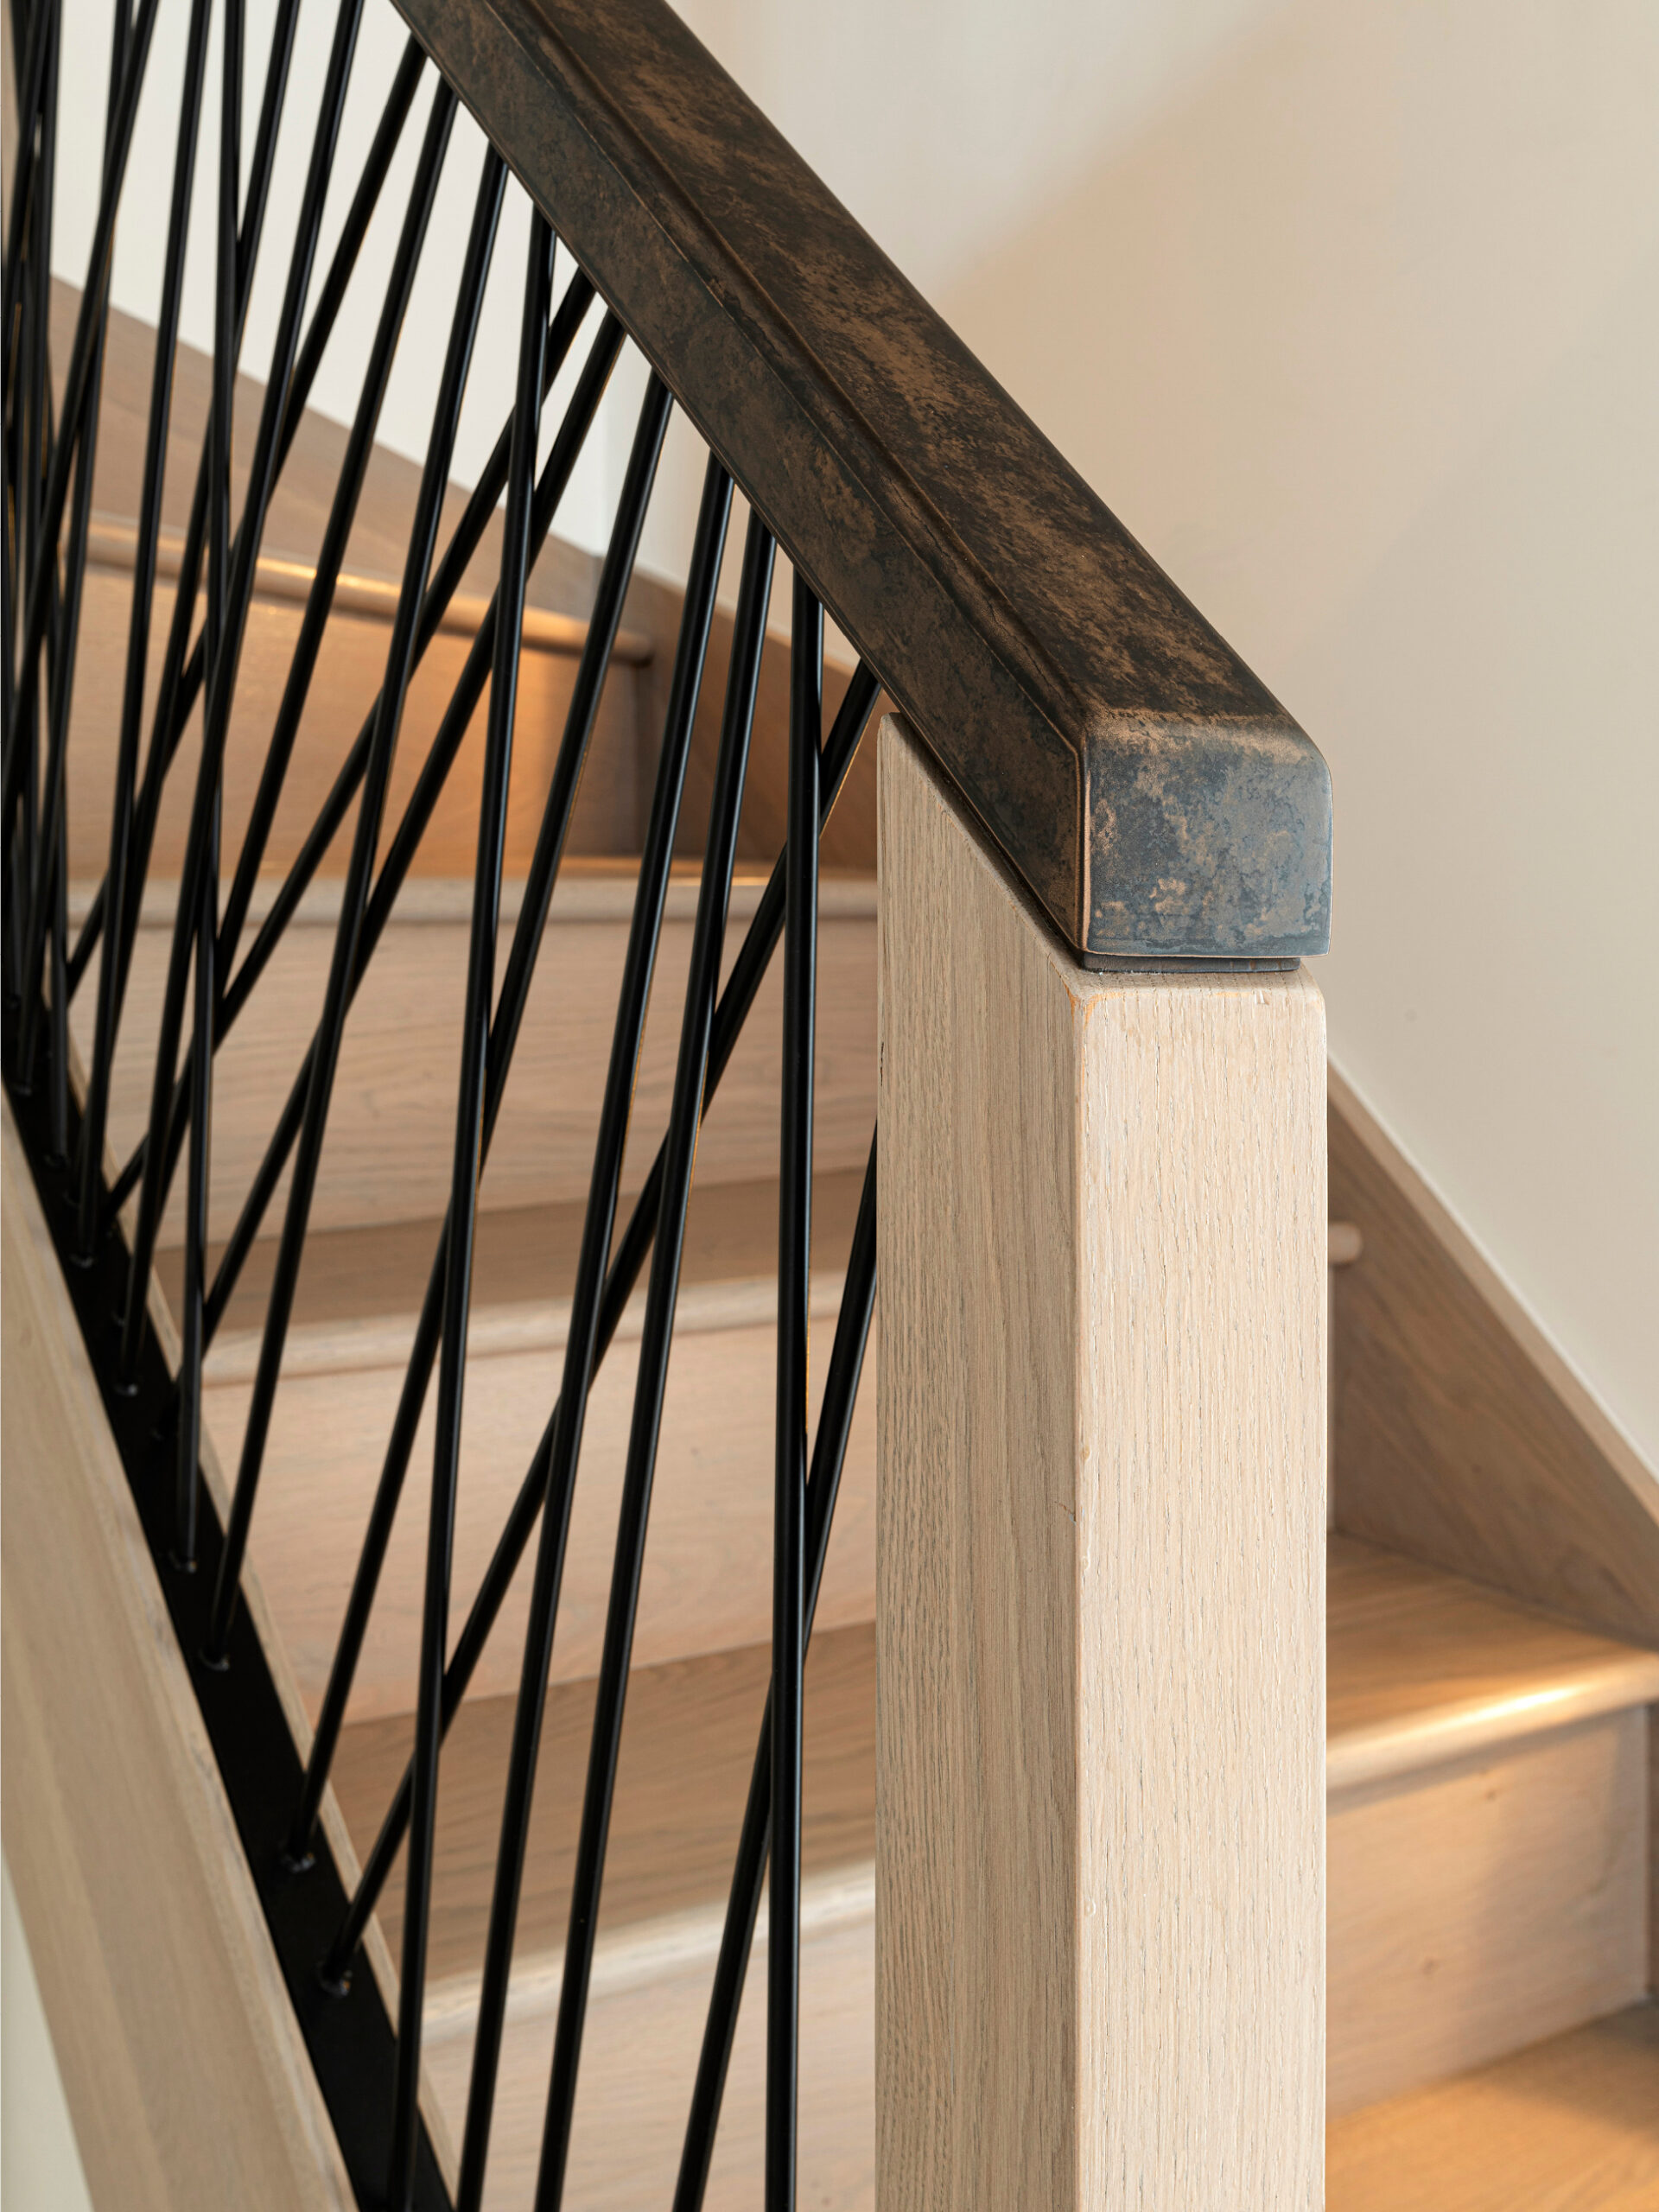 Bespoke metal and oak staircase with liquid metal feature handle